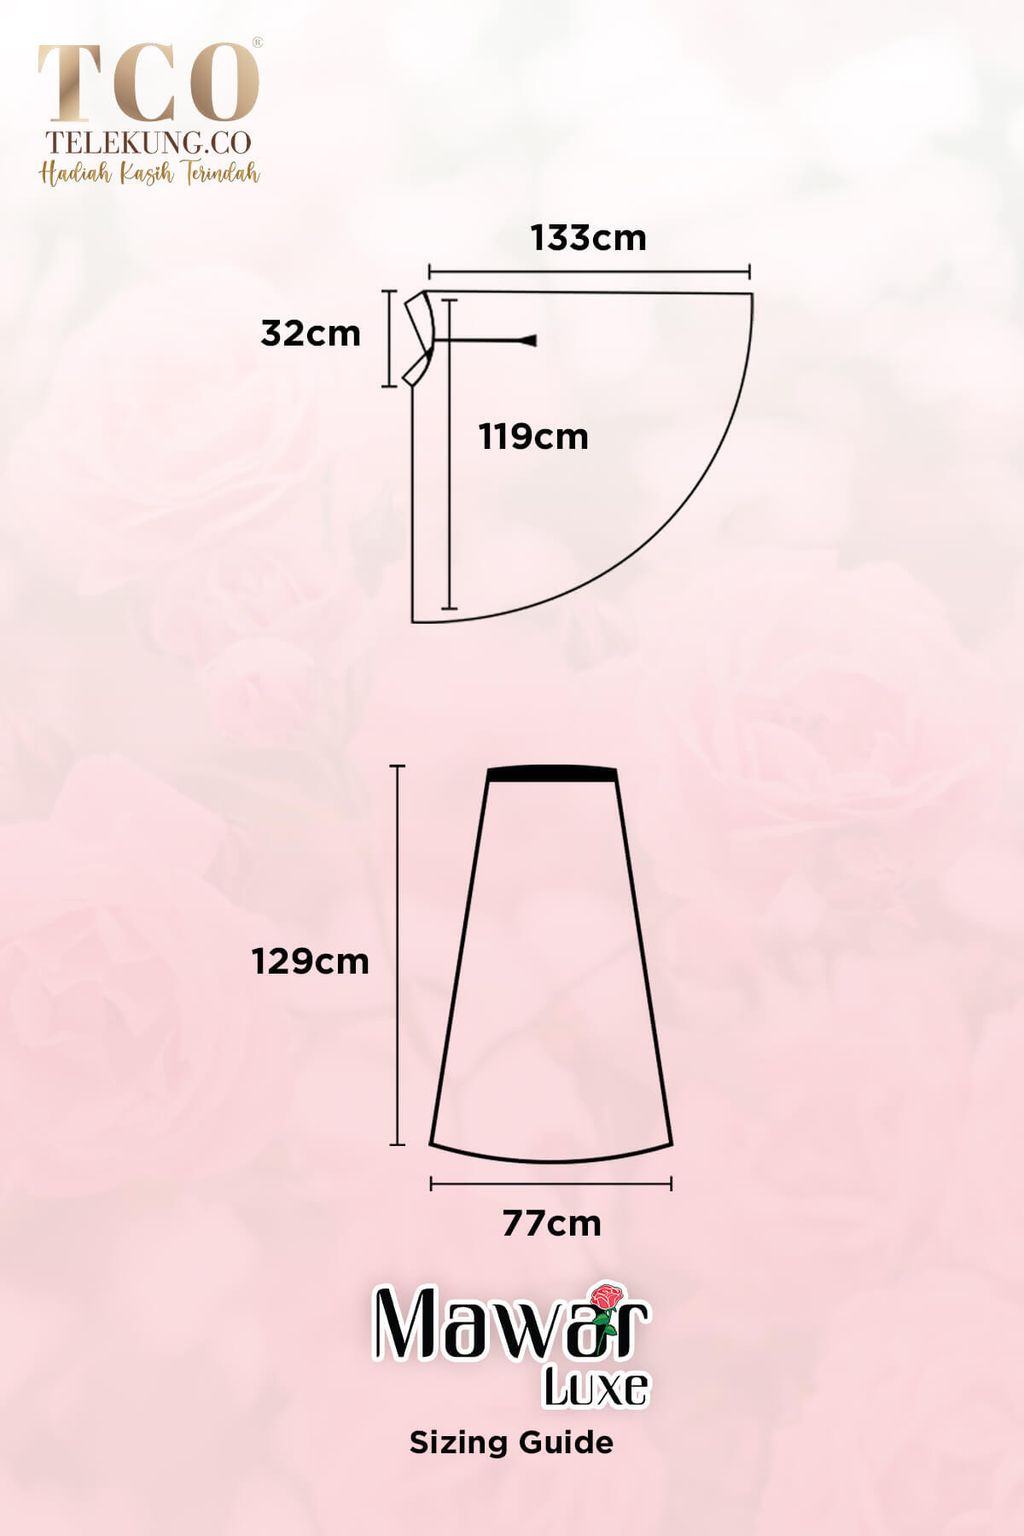 Telekung Mawar Luxe by TCO - Sizing guide